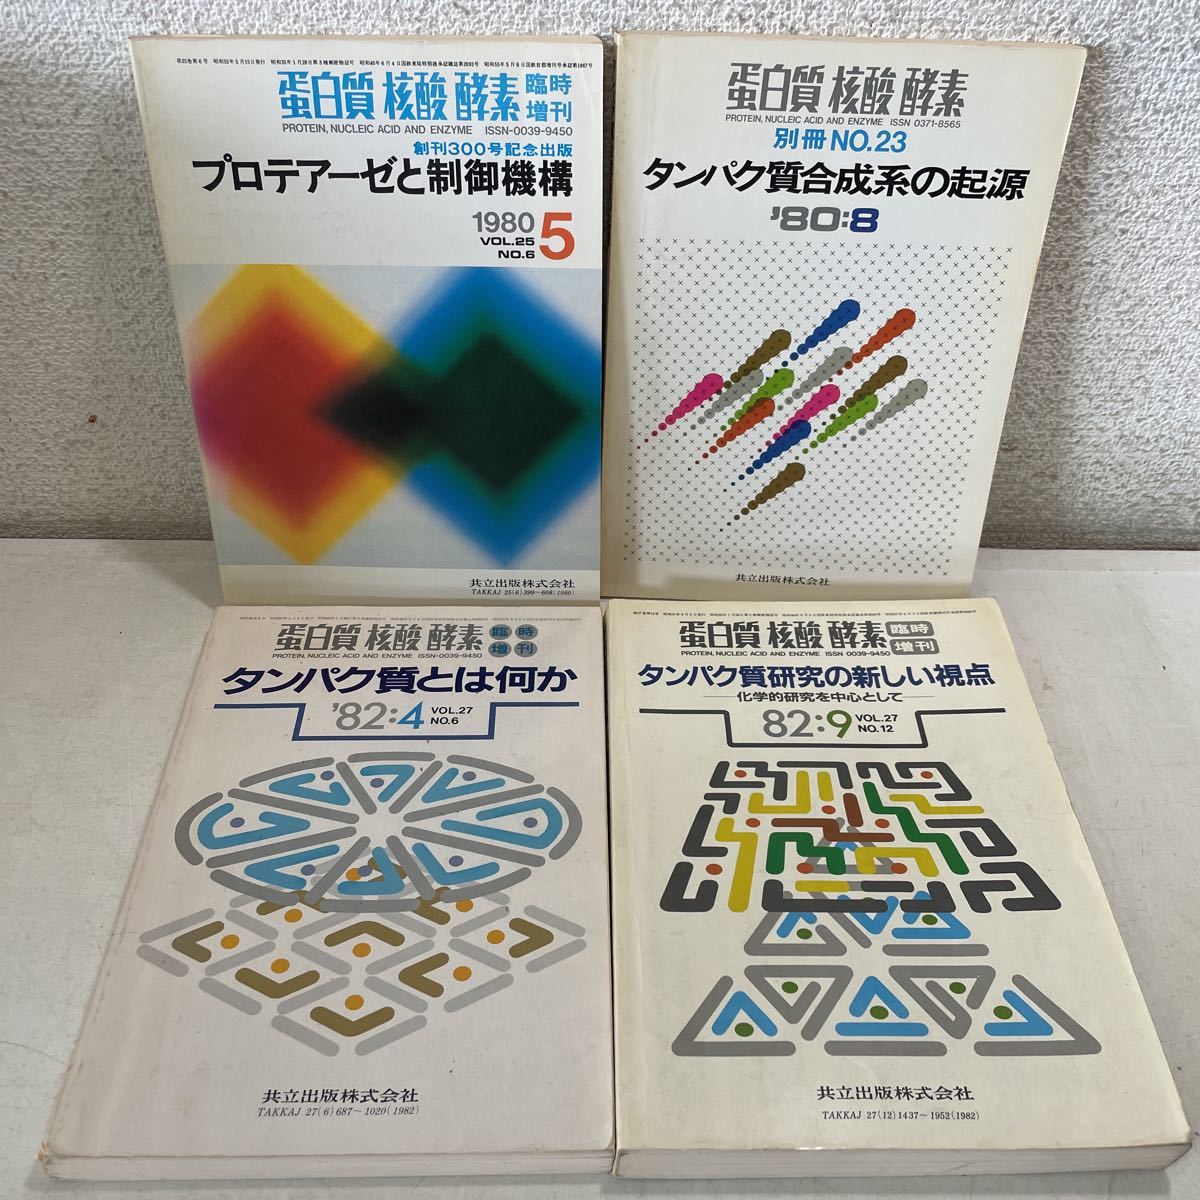 220902!A04! free shipping *. white quality . acid enzyme increase . number together 15 pcs. set 1980~1989 year joint publish * nerve biochemistry science medicine magazine protein quality small .